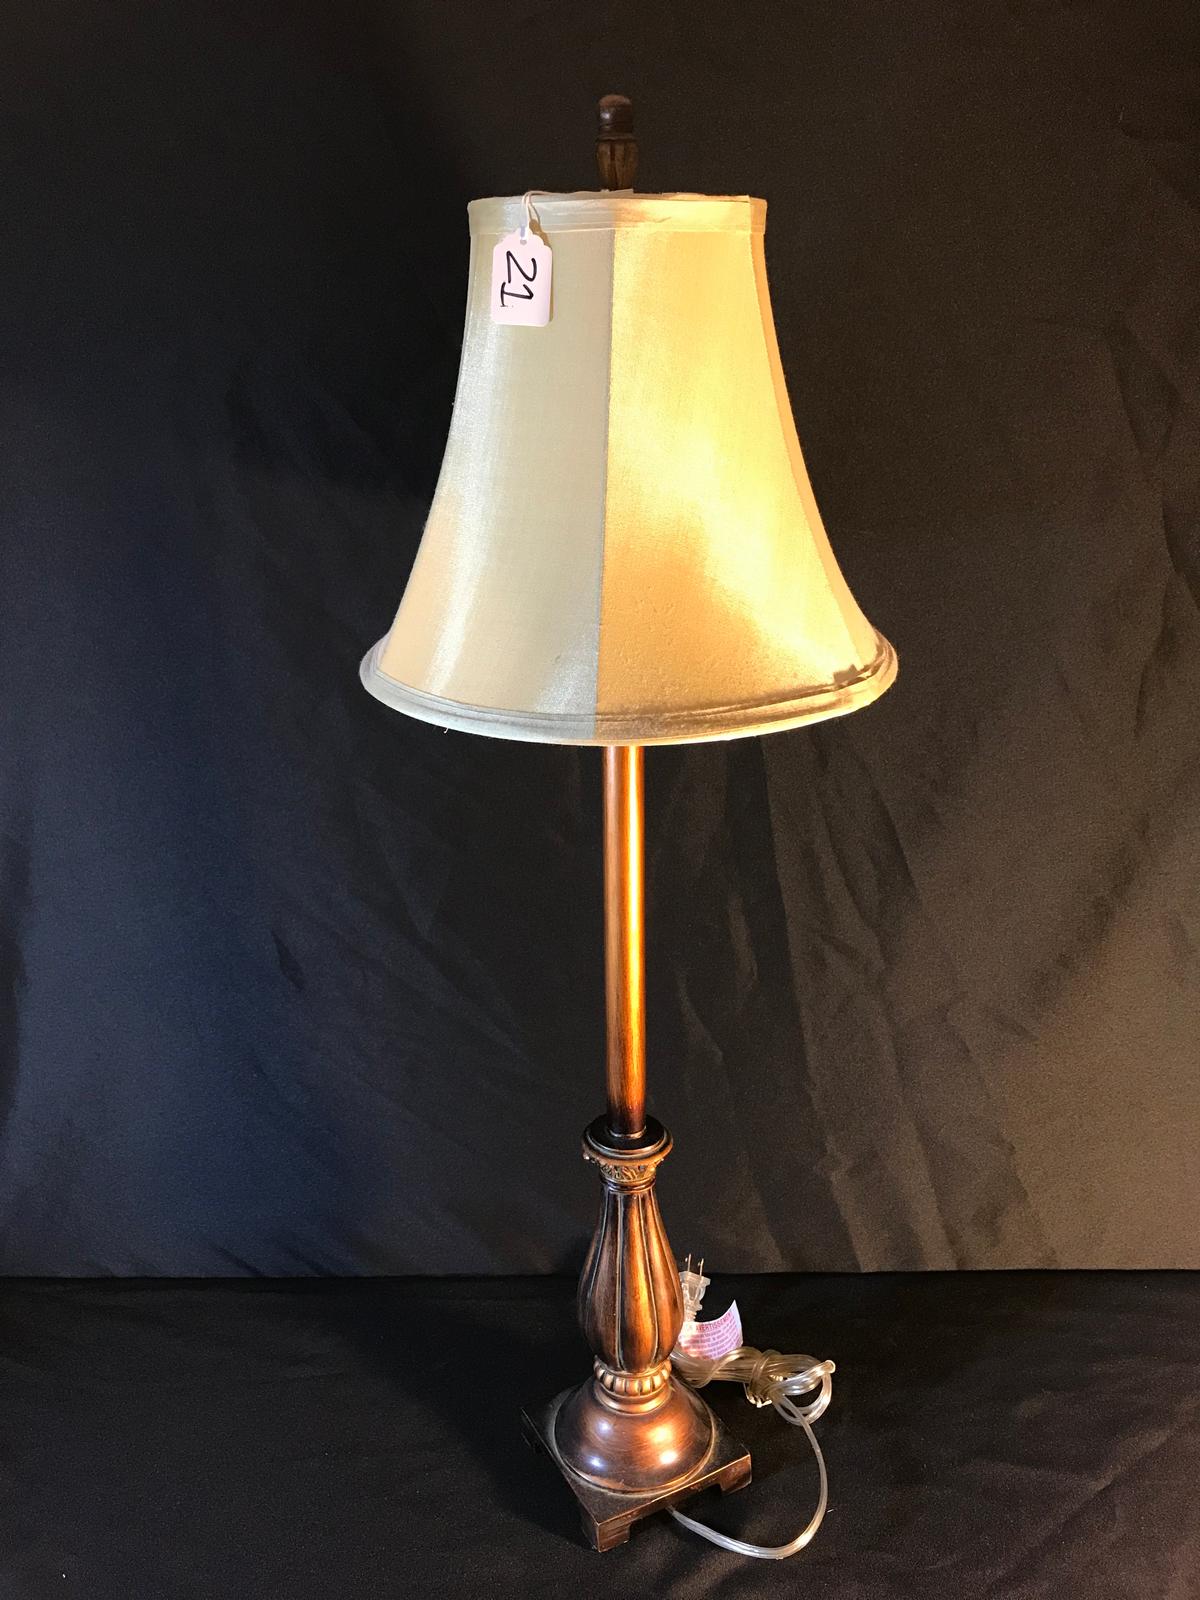 Contemporary Stick Lamp Measures 34" Tall